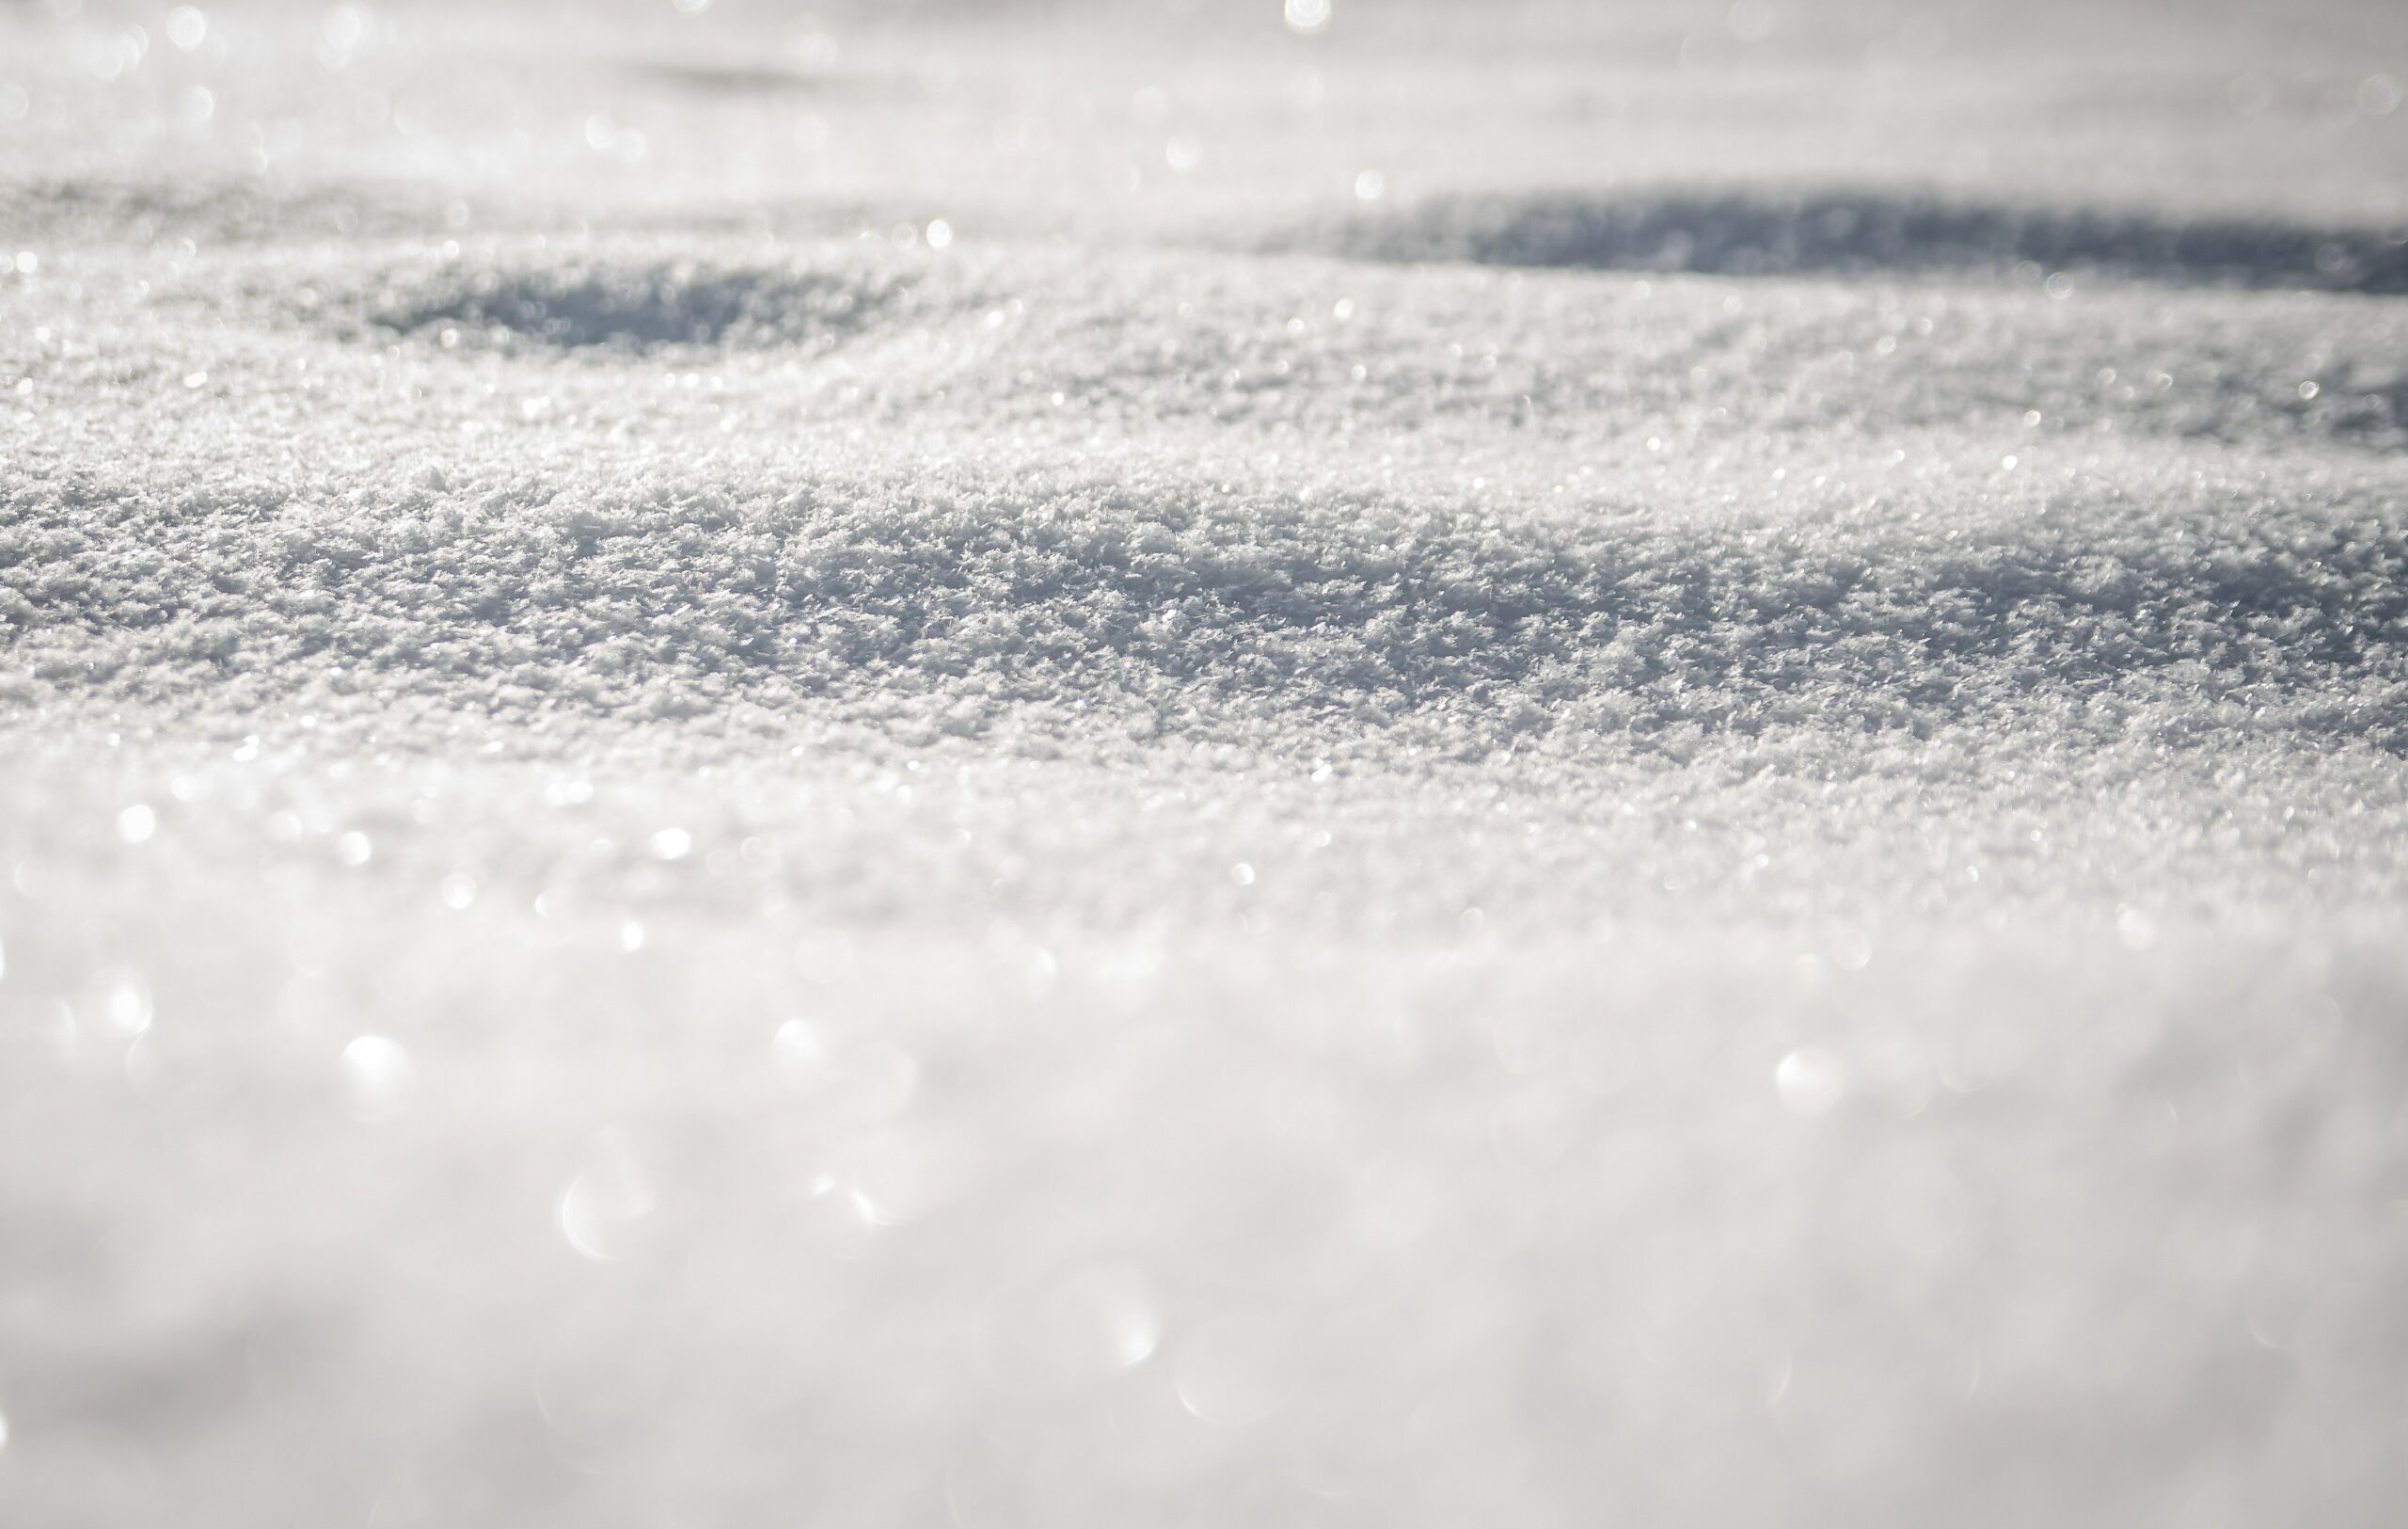 Snow might be the next clean energy source